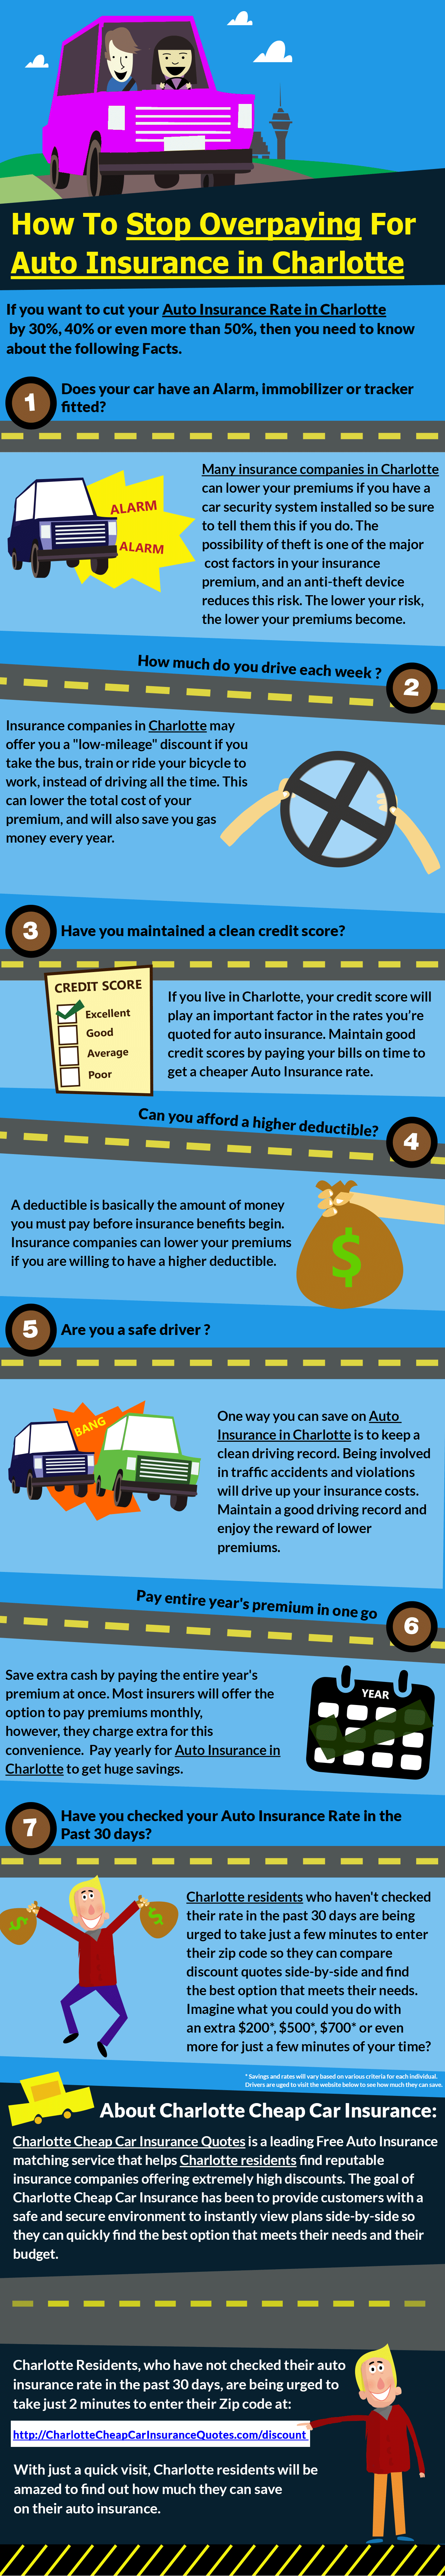 Auto Insurance In Charlotte NC - Save up to 50% or more on your auto insurance in Charlotte.... Infographic